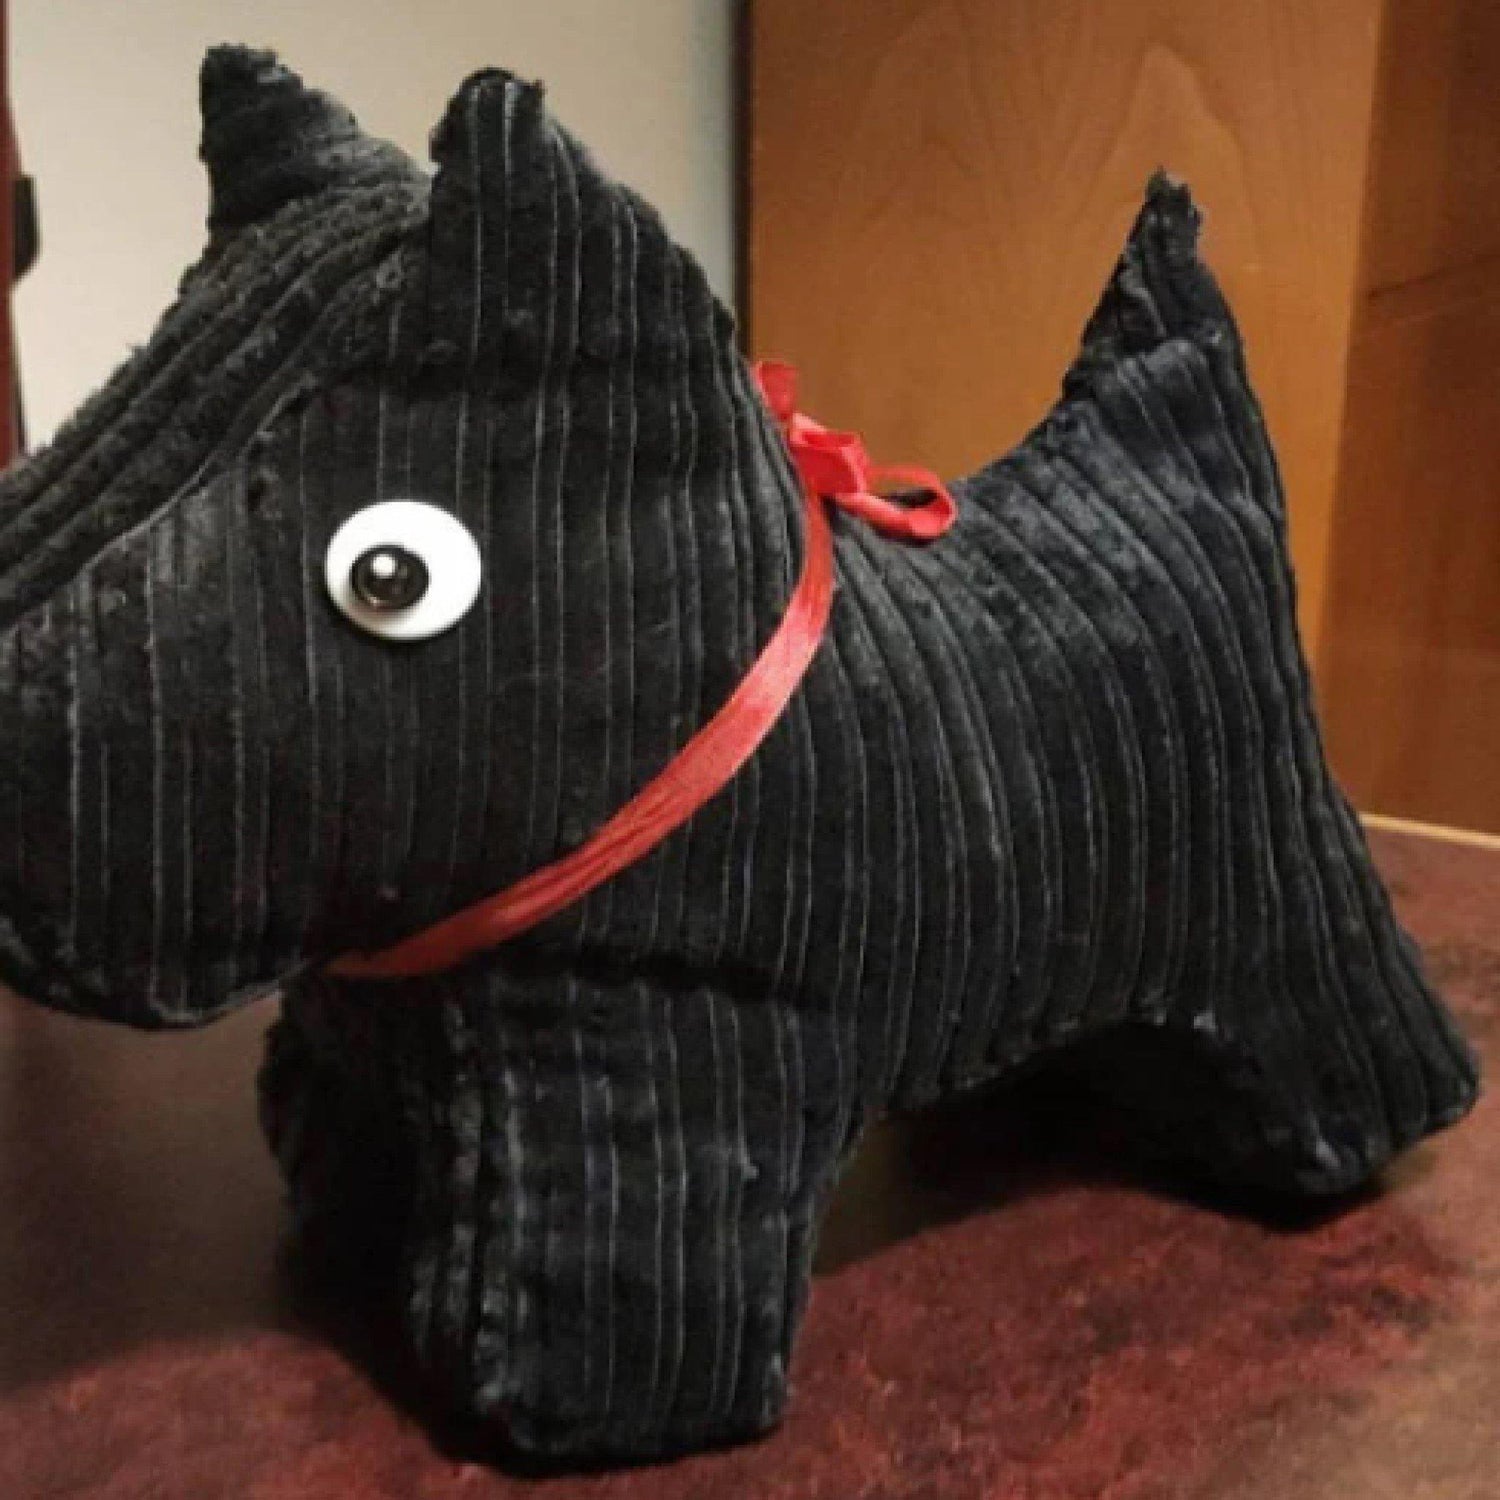 A made up toy dog from a sewing pattern